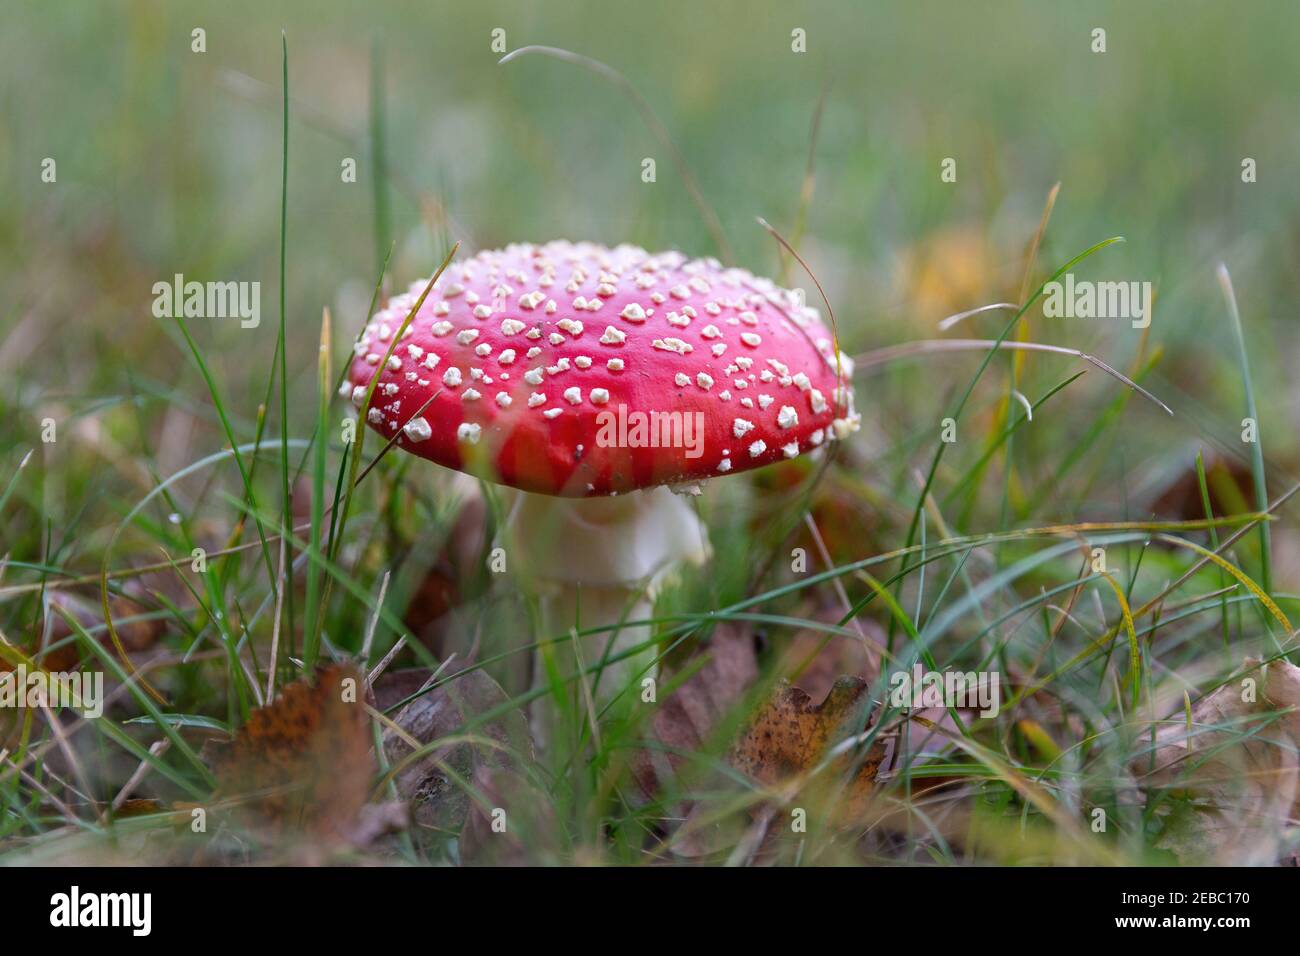 Poisonous red toadstool in the forest, Amanita Muscaria, fly agaric mushroom Stock Photo